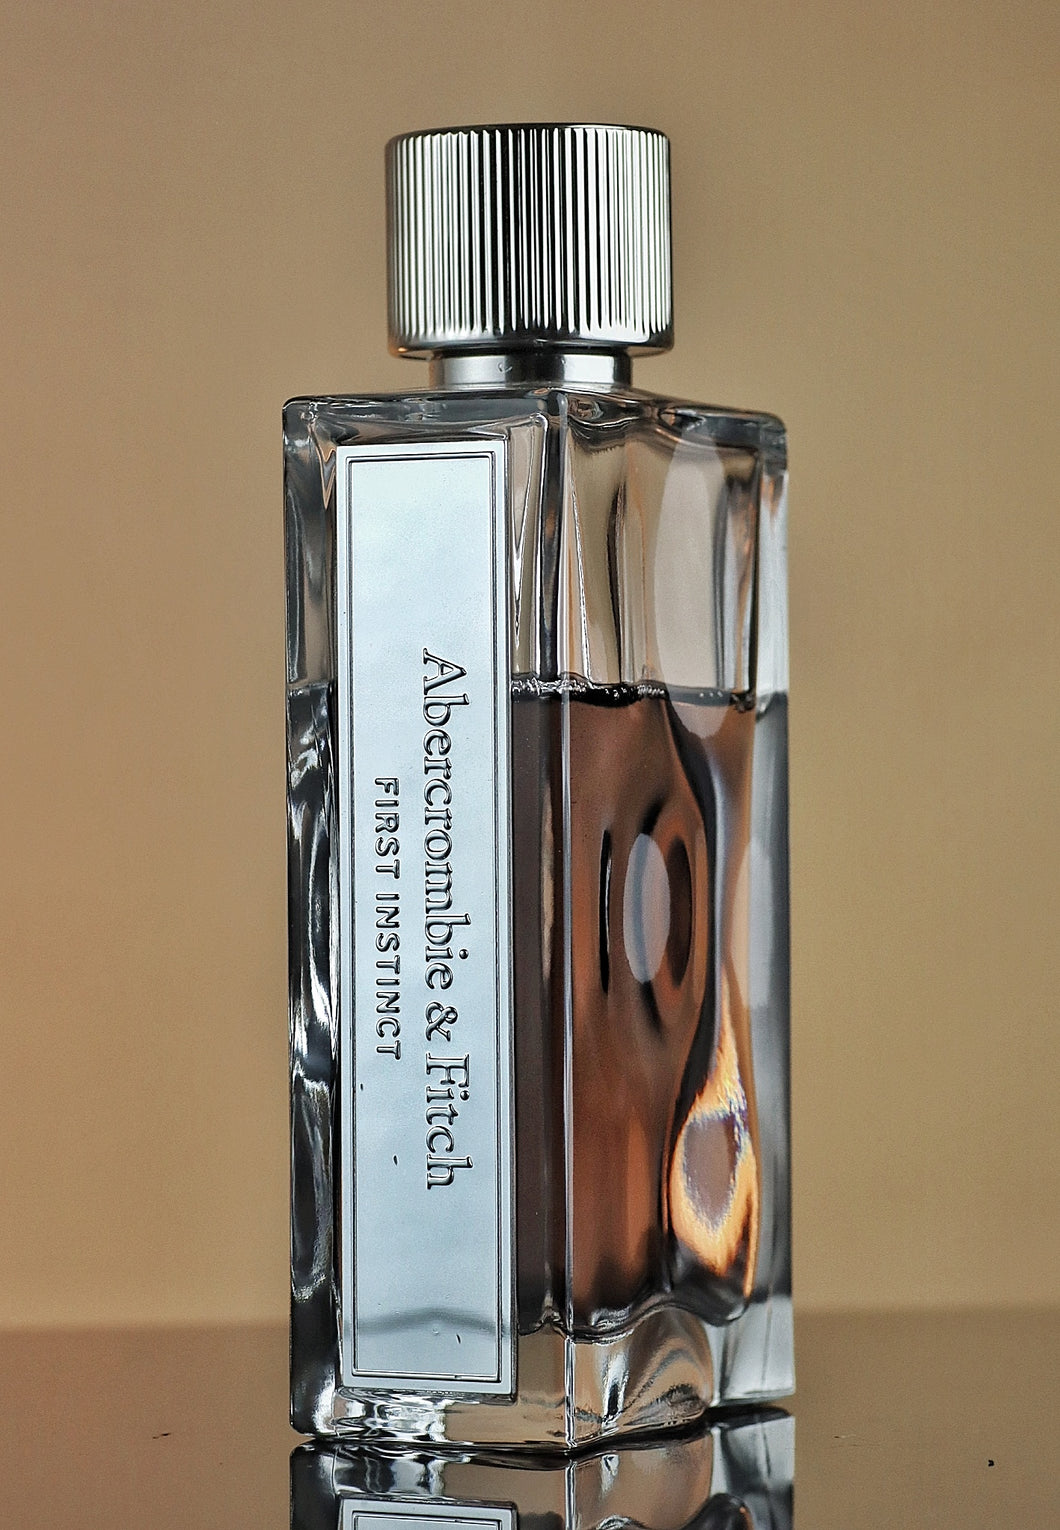 Abercrombie & Fitch First Instinct, Fragrance Sample